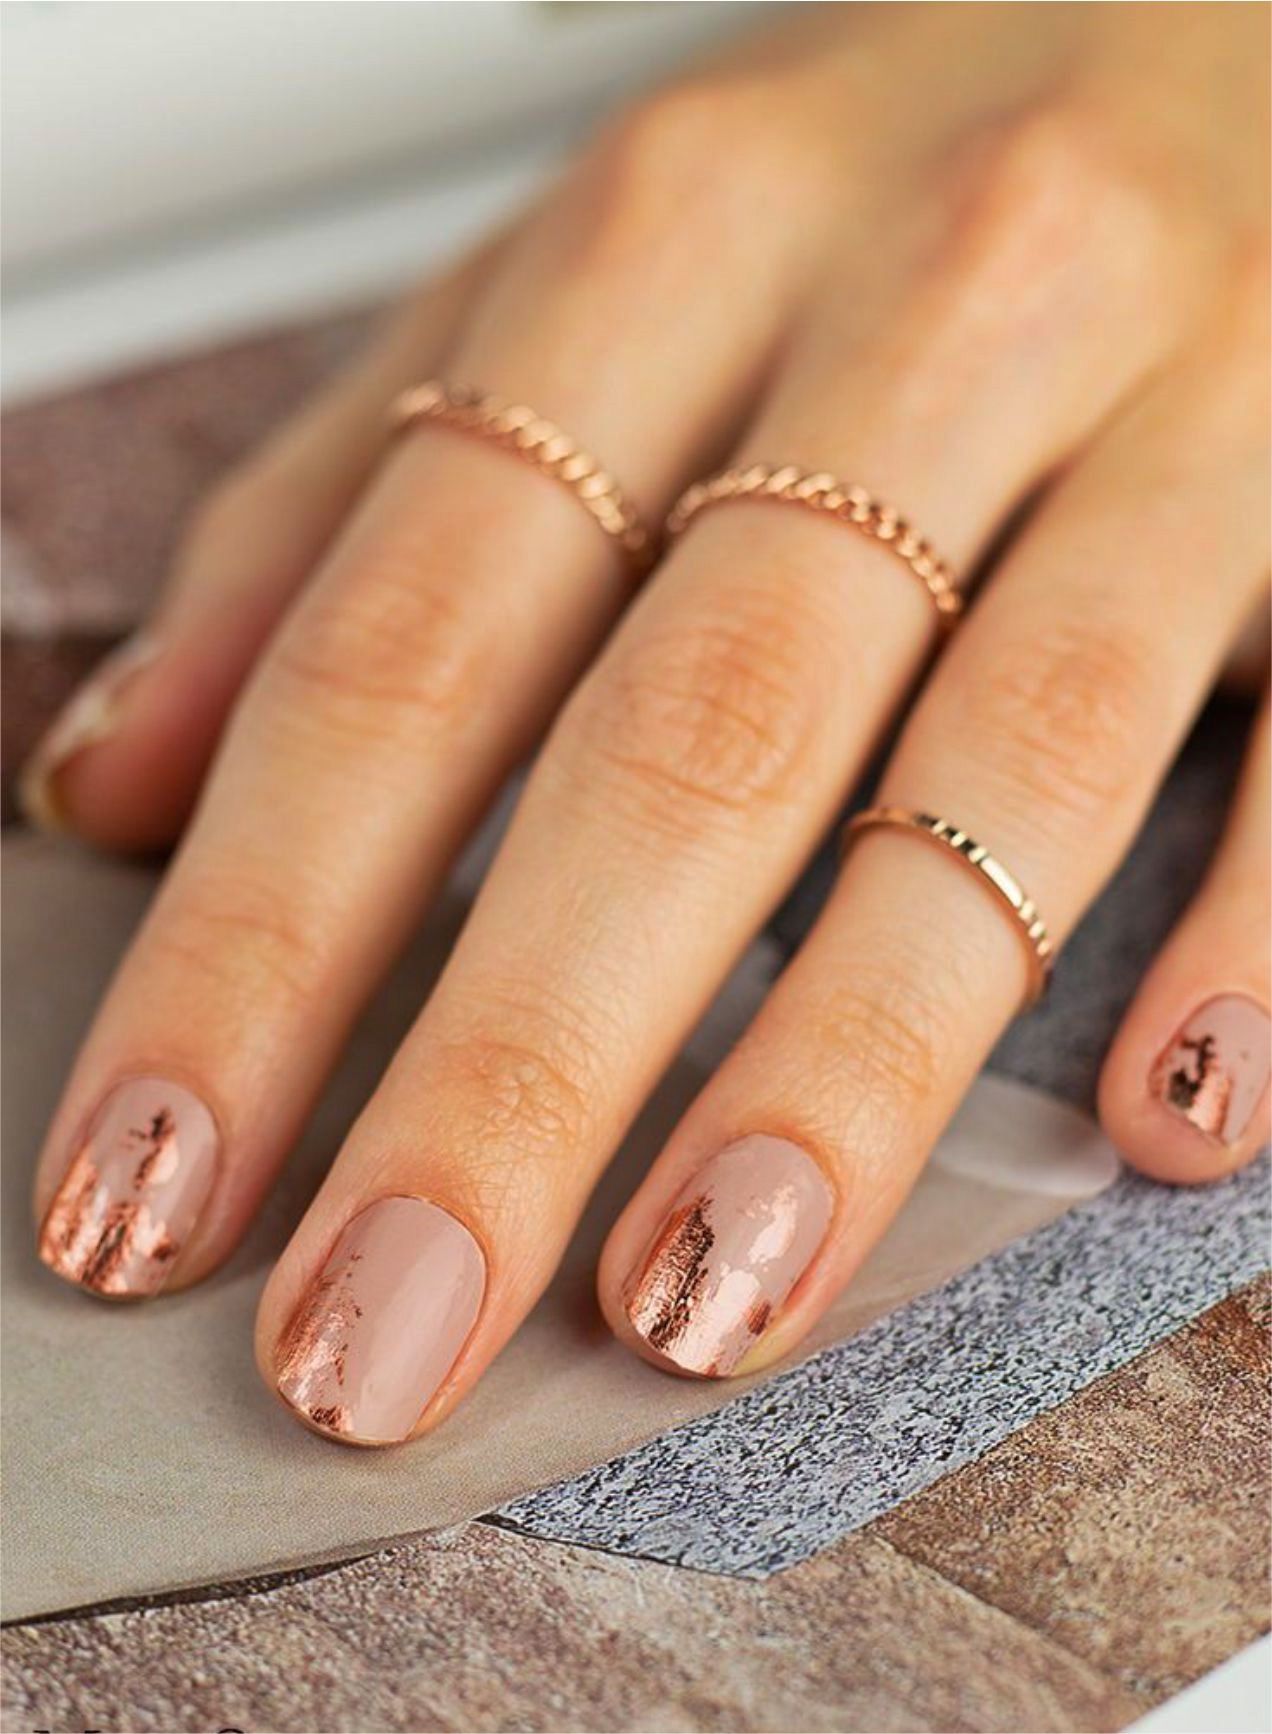 45 Classy Spring Nail Color Designs For Your Exceptional Style In 2020 Nehty